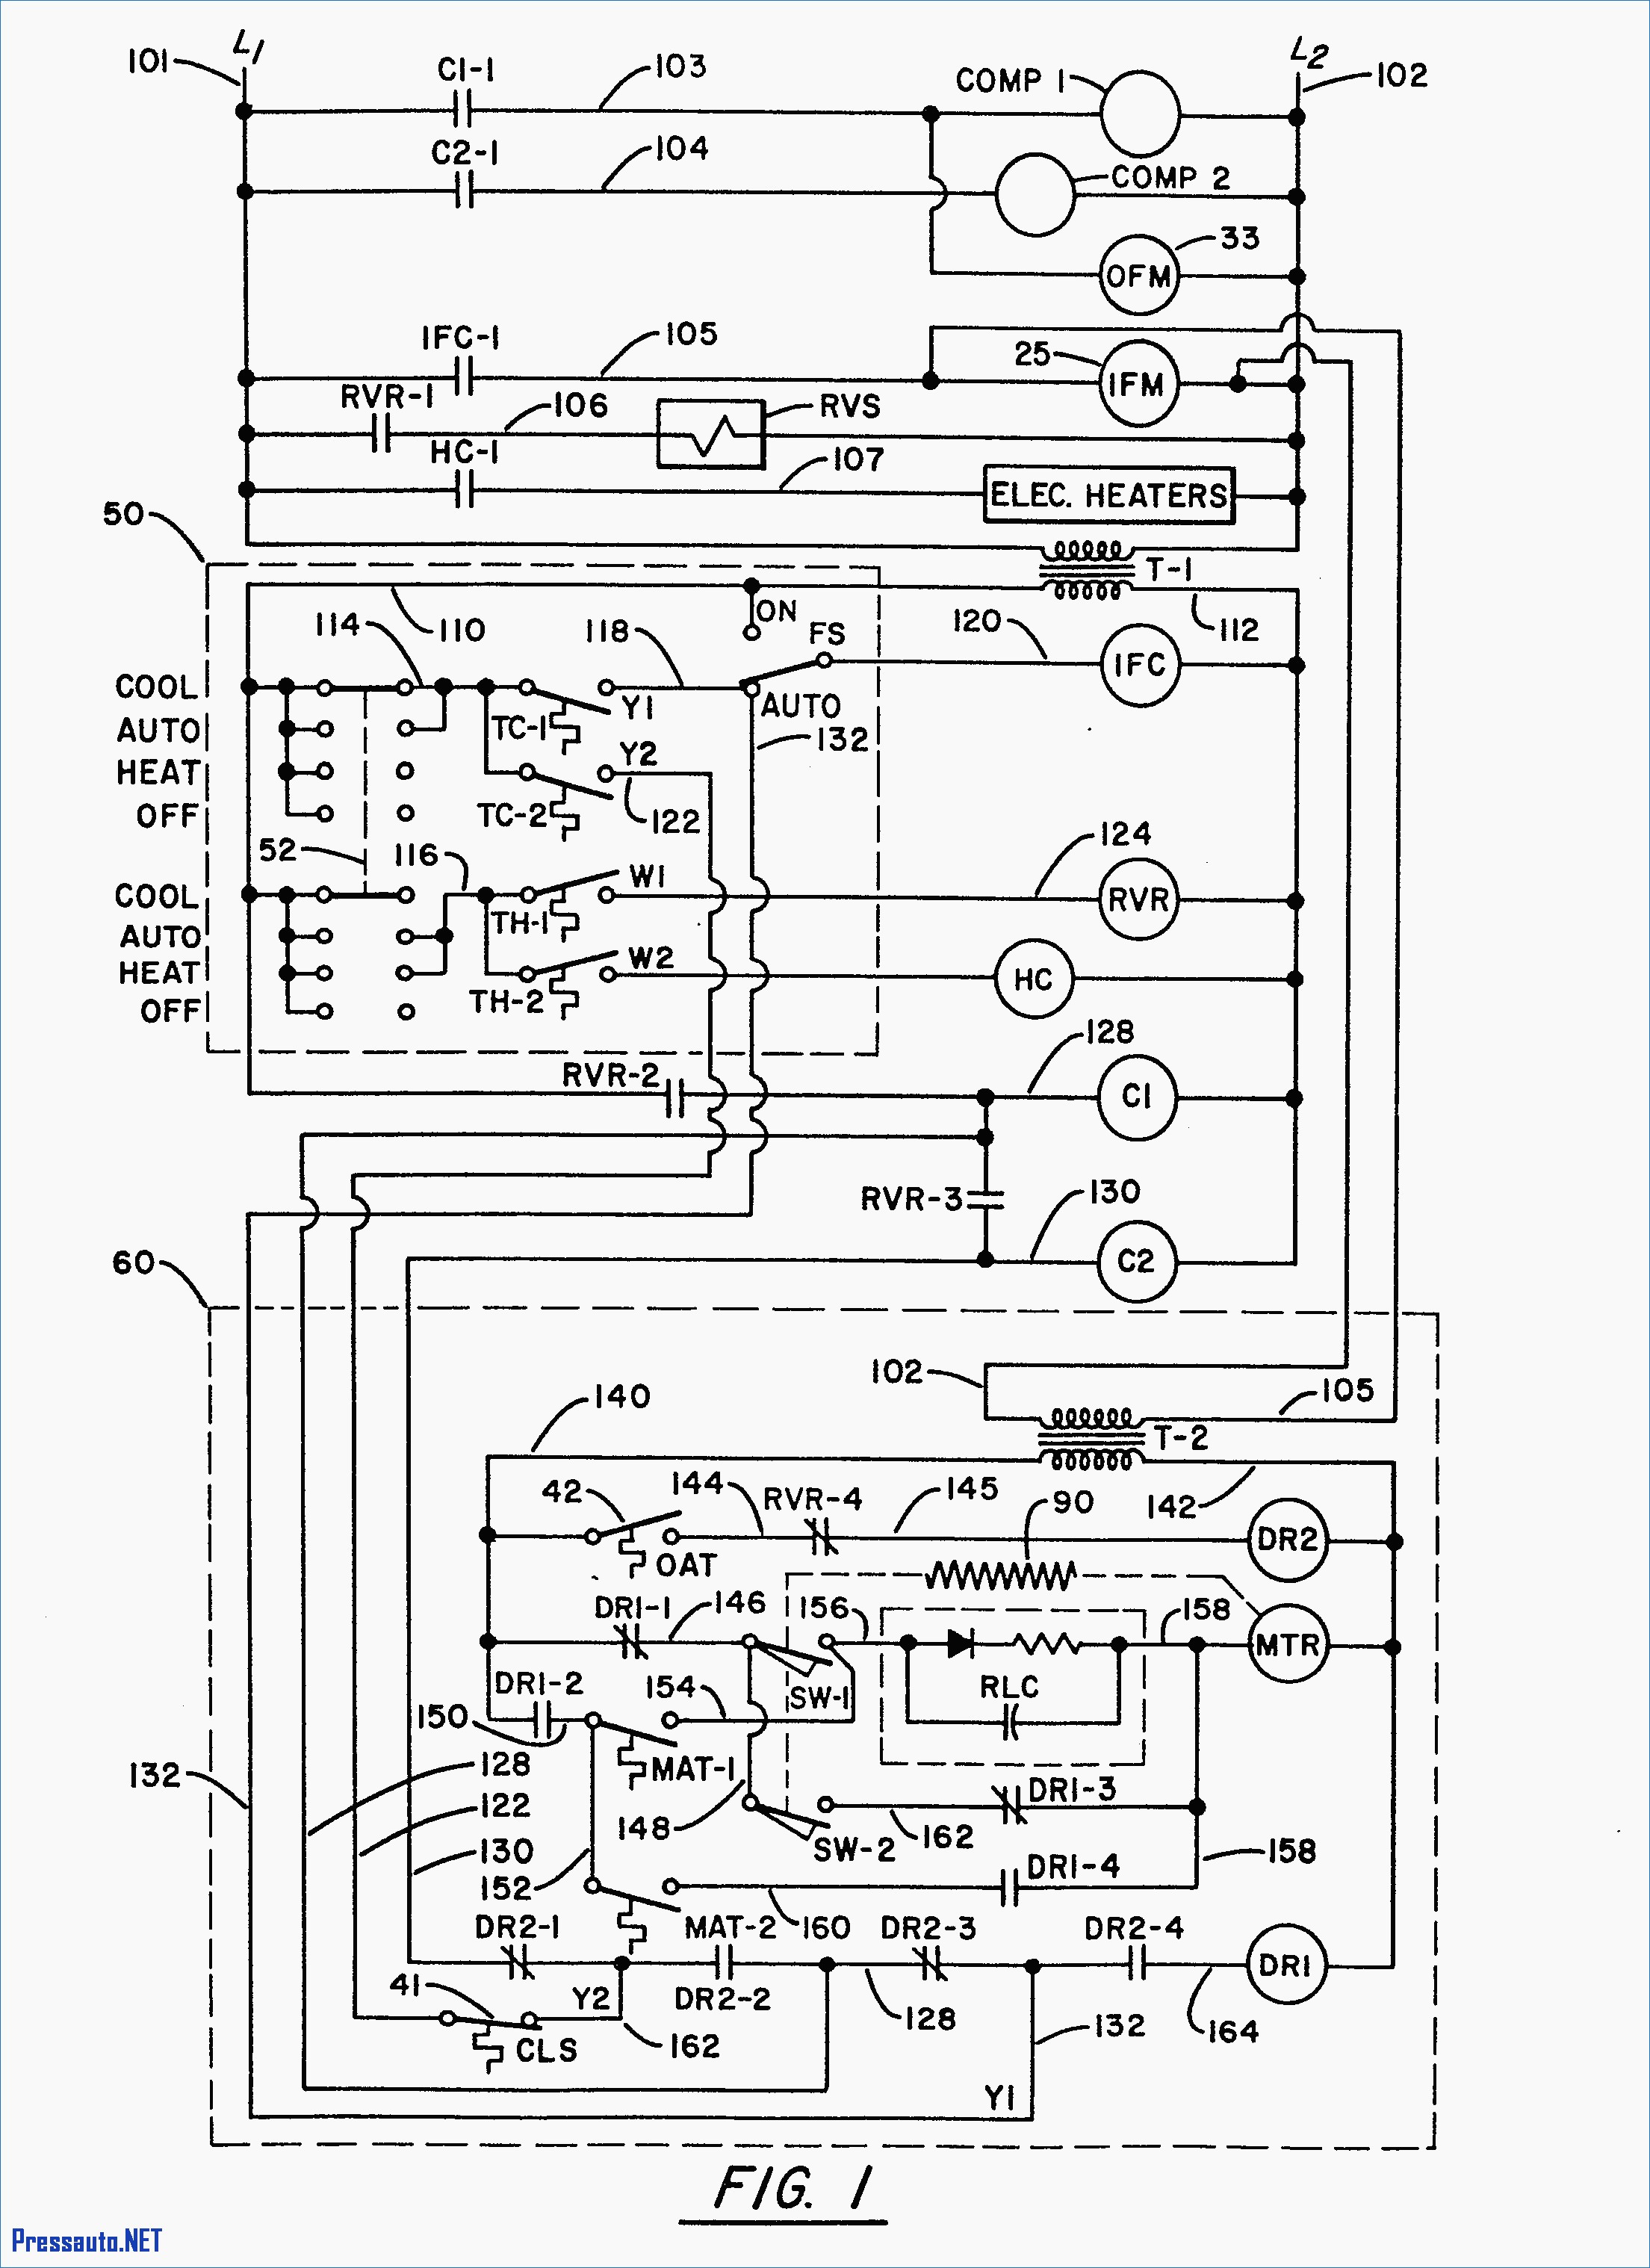 Wiring Diagram for An Air Conditioning Unit Best York Wiring Diagrams Air Conditioners Patent Ep A1